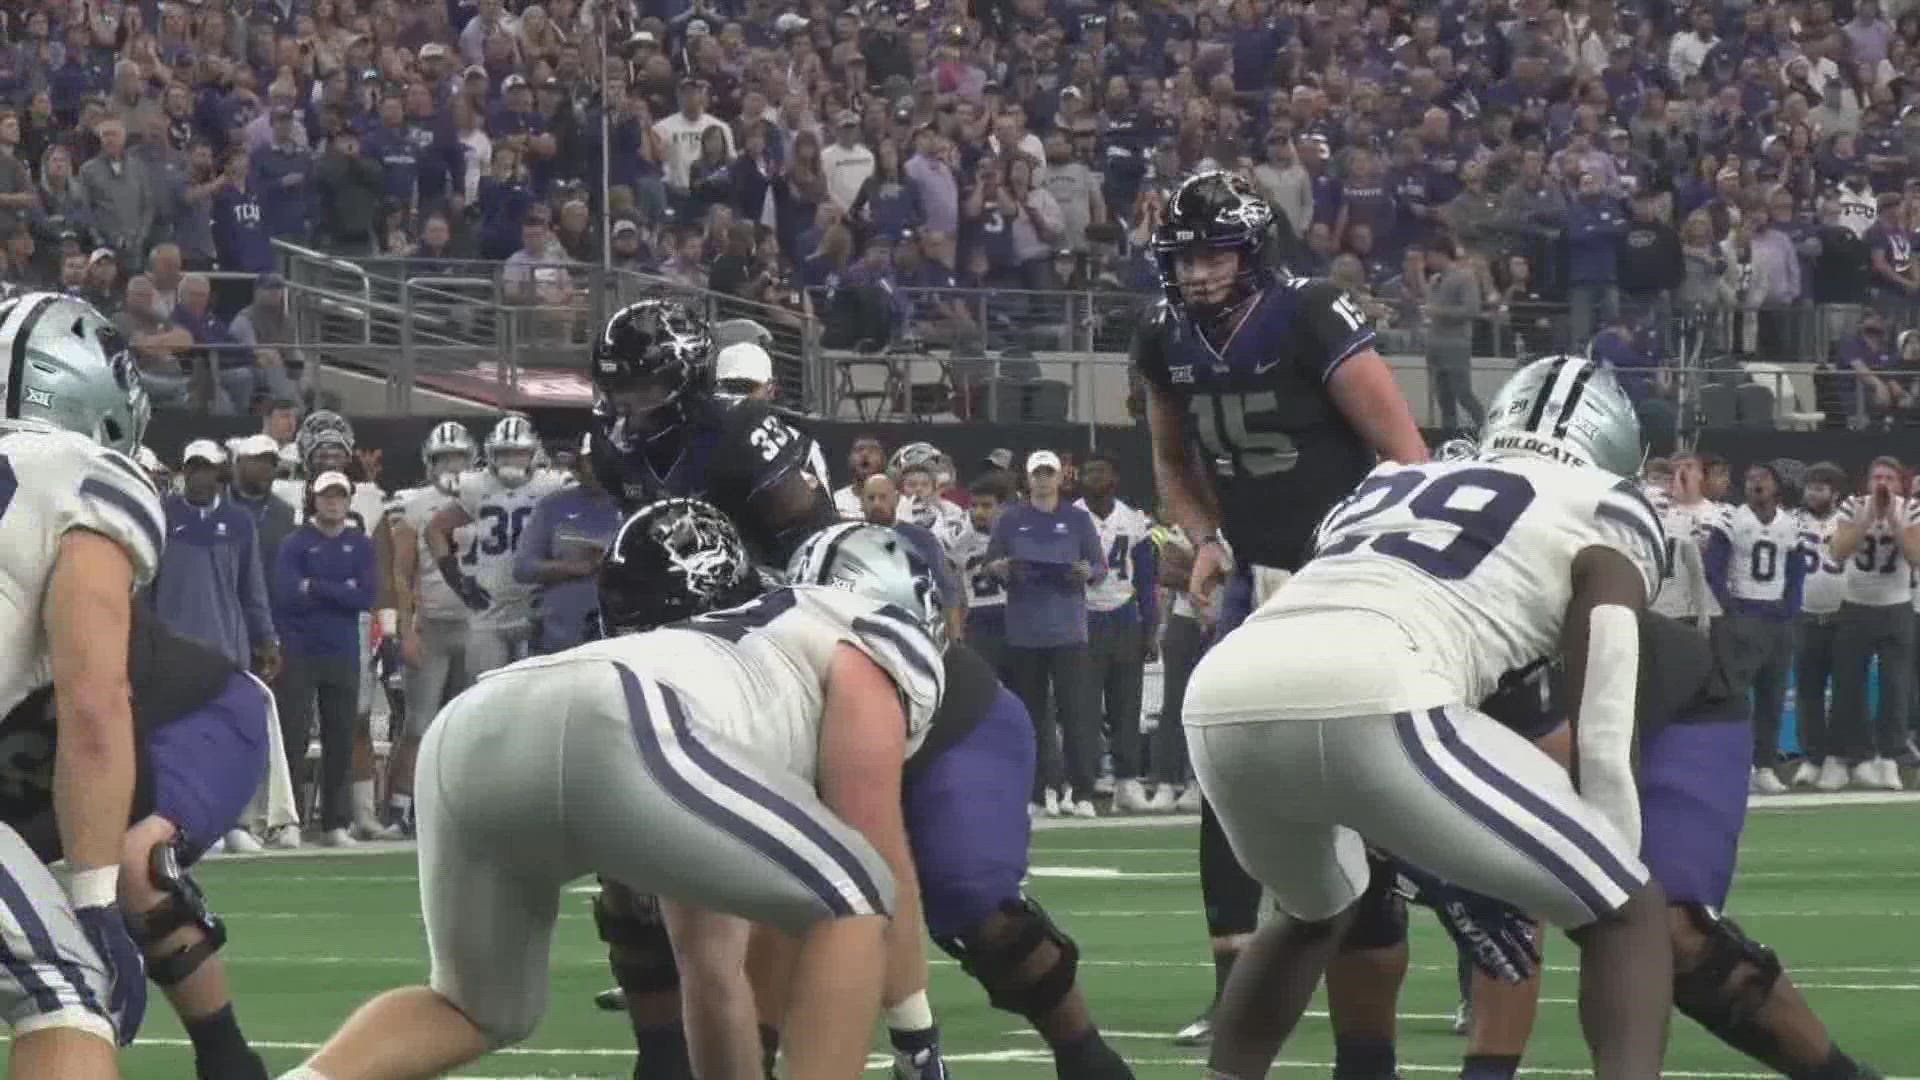 The Wildcats knocked off undefeated TCU at AT&T stadium.